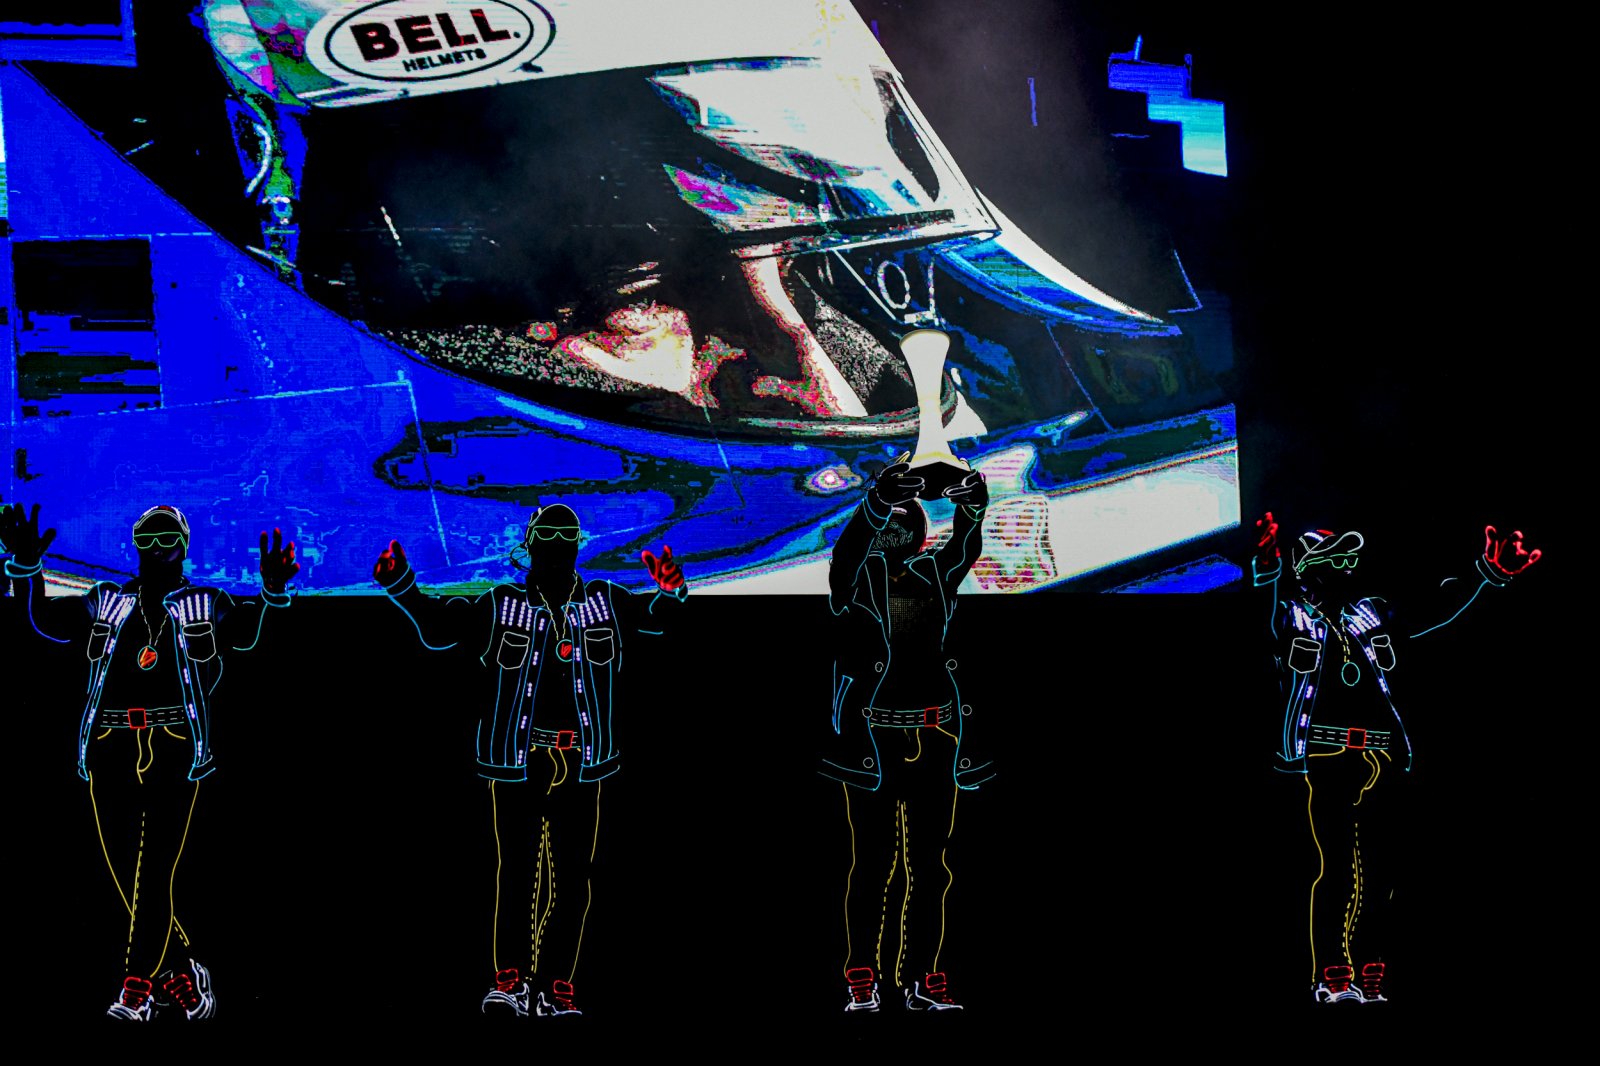 2022 FIA Motorsport Games launches with spectacular opening ceremony in Marseille